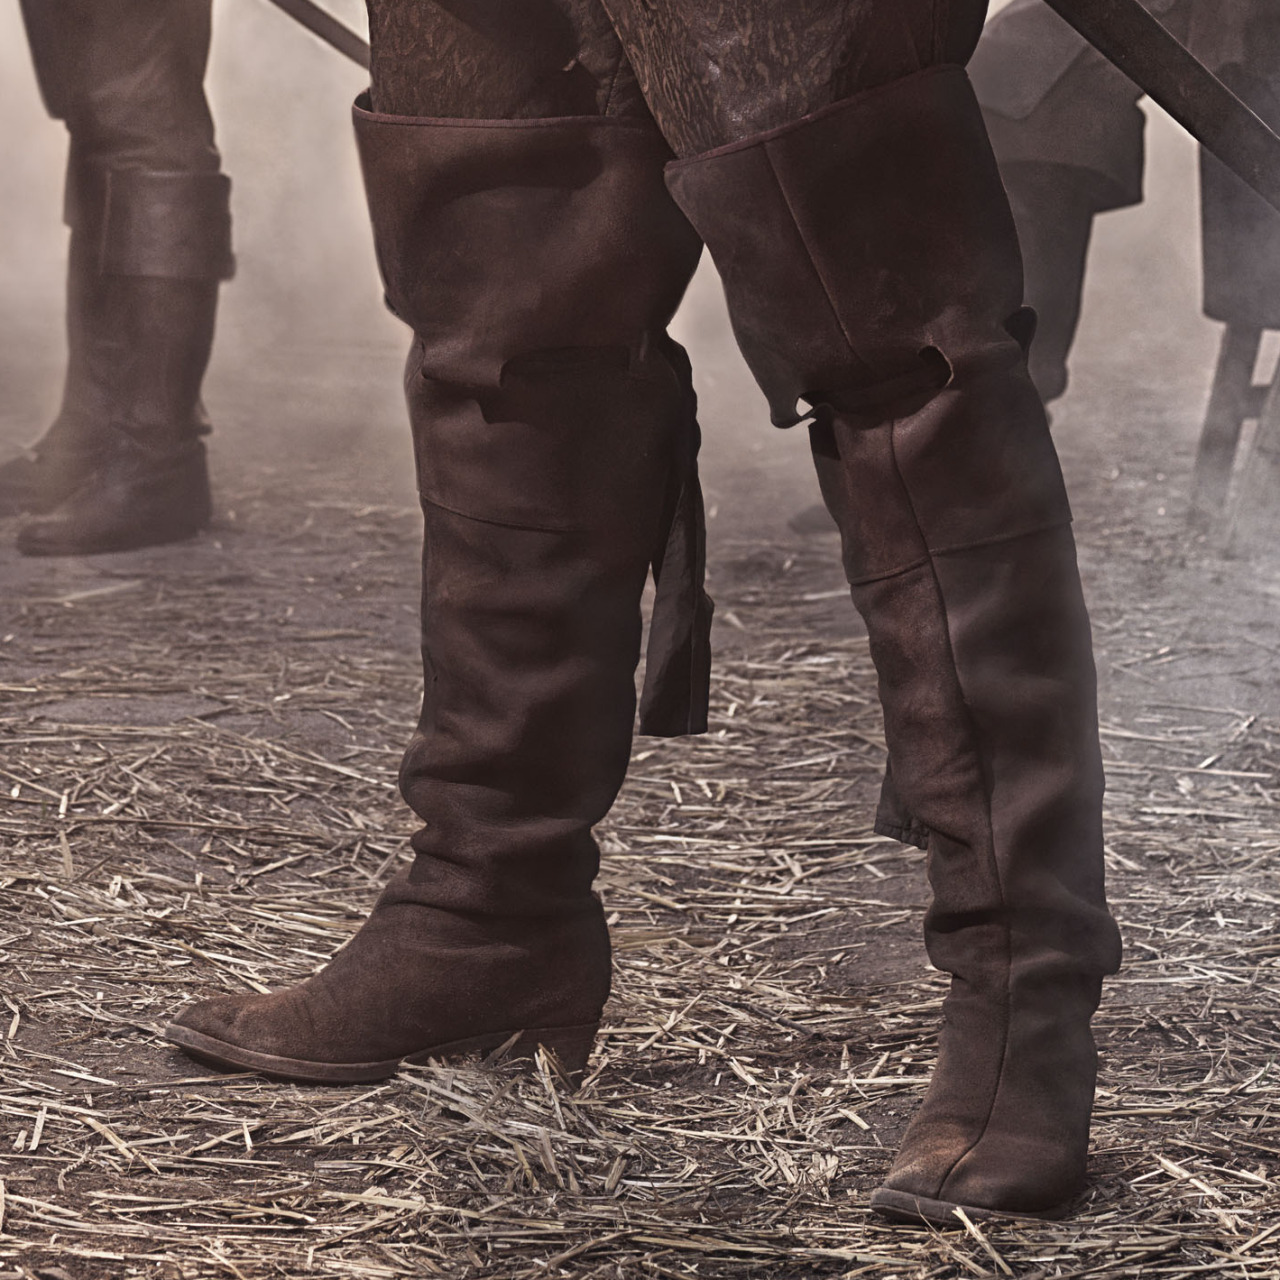 Sam Hawkeye | The Musketeers costumes - Boots 1/1 The...